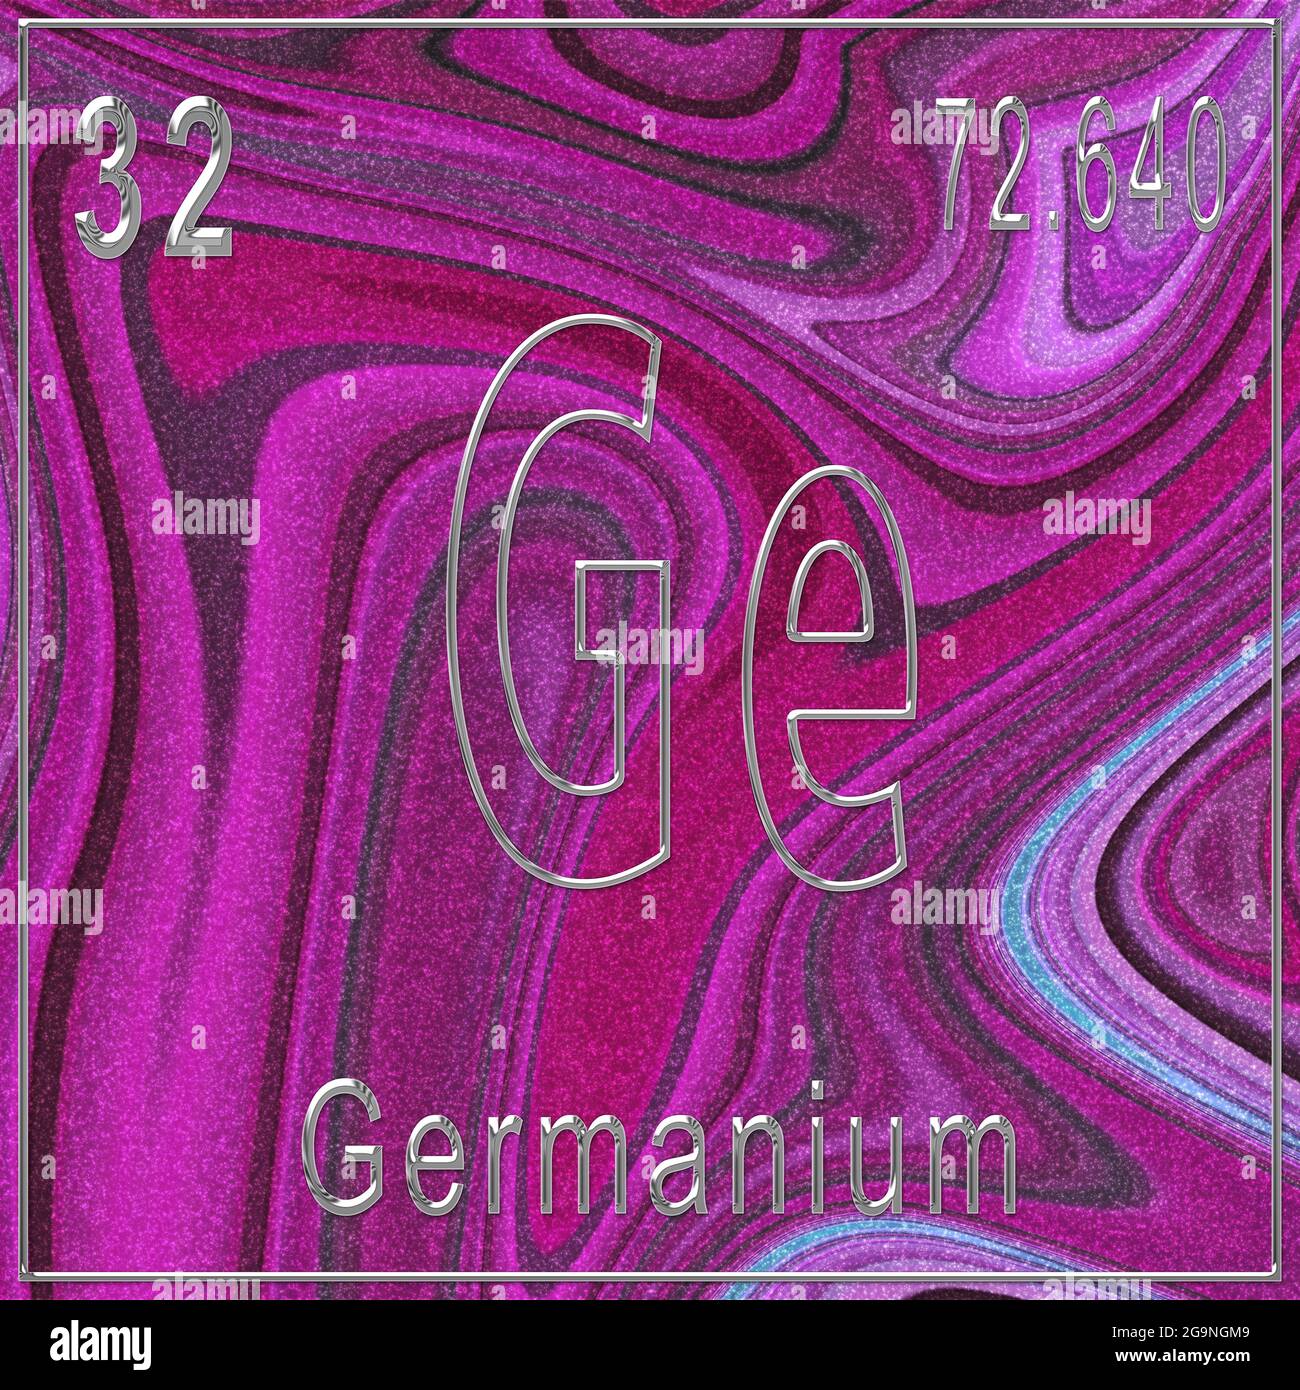 Germanium chemical element, Sign with atomic number and atomic weight, Periodic Table Element, Pink background Stock Photo